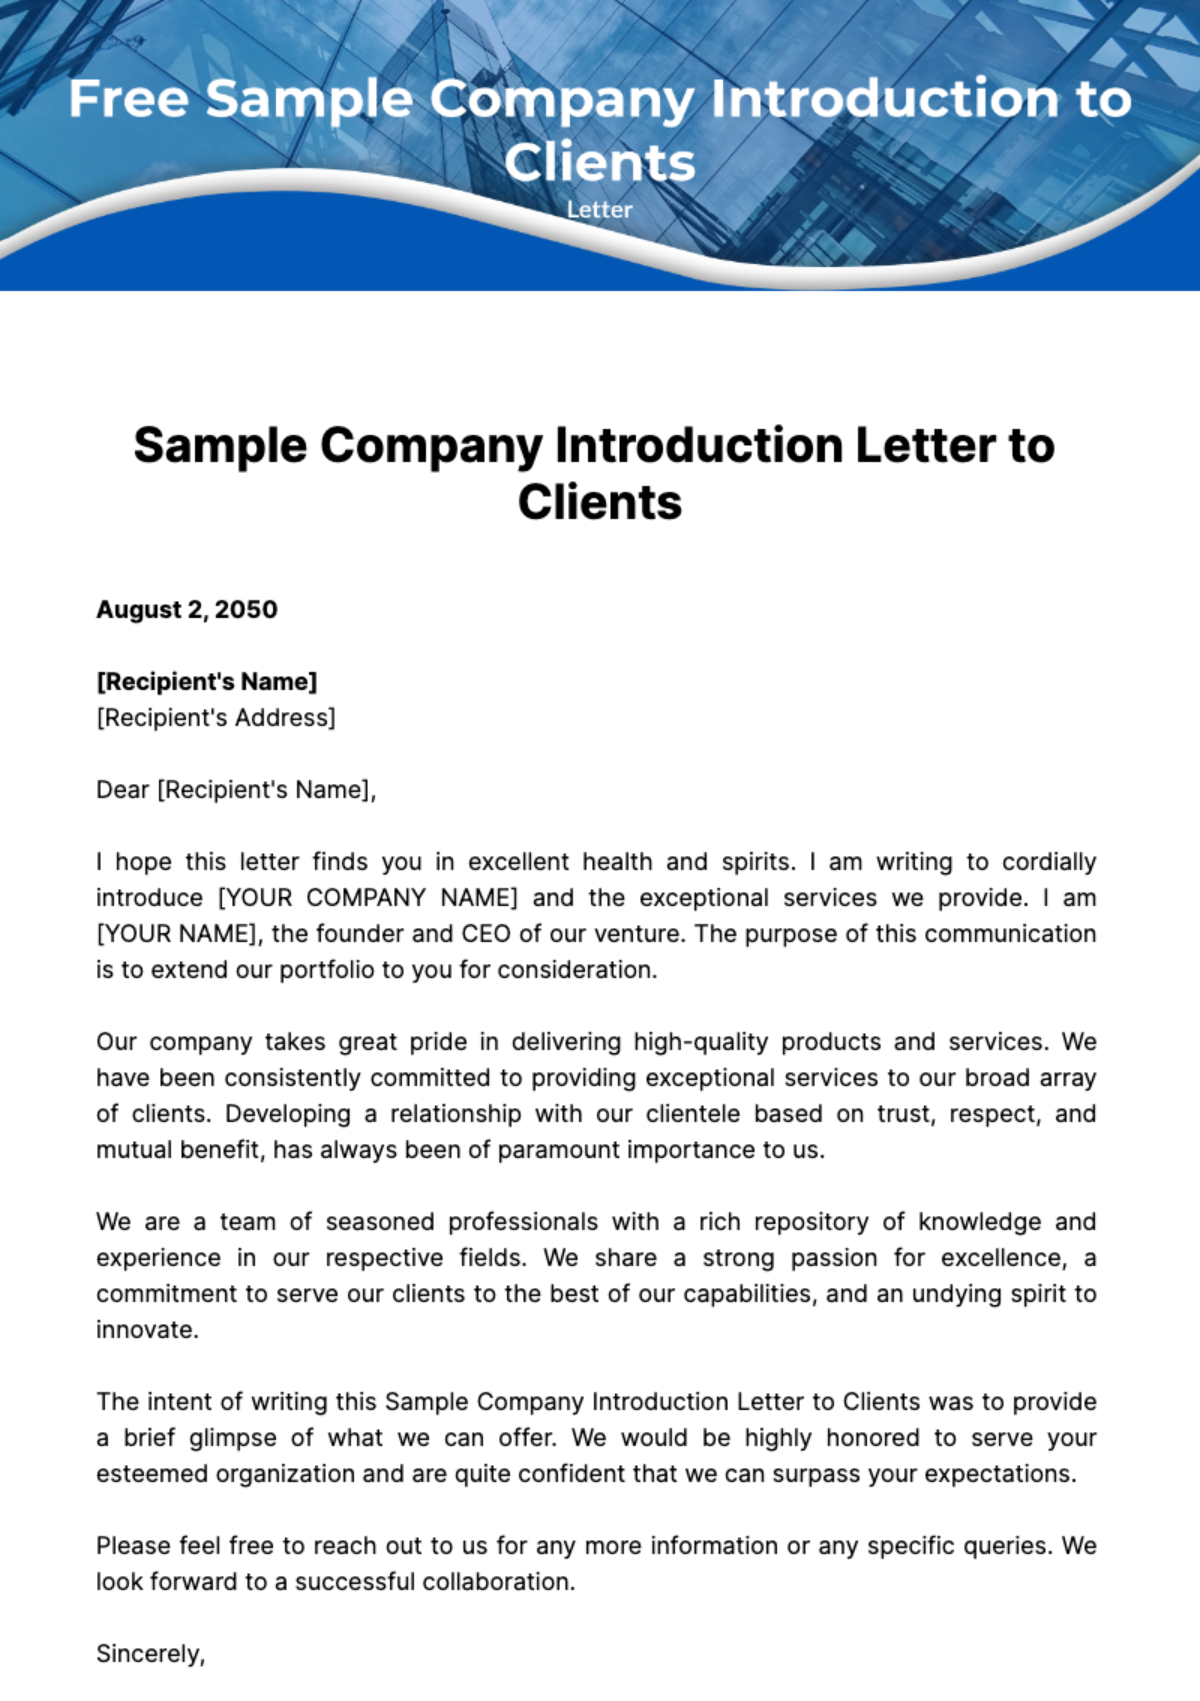 Free Sample Company Introduction Letter to Clients Template